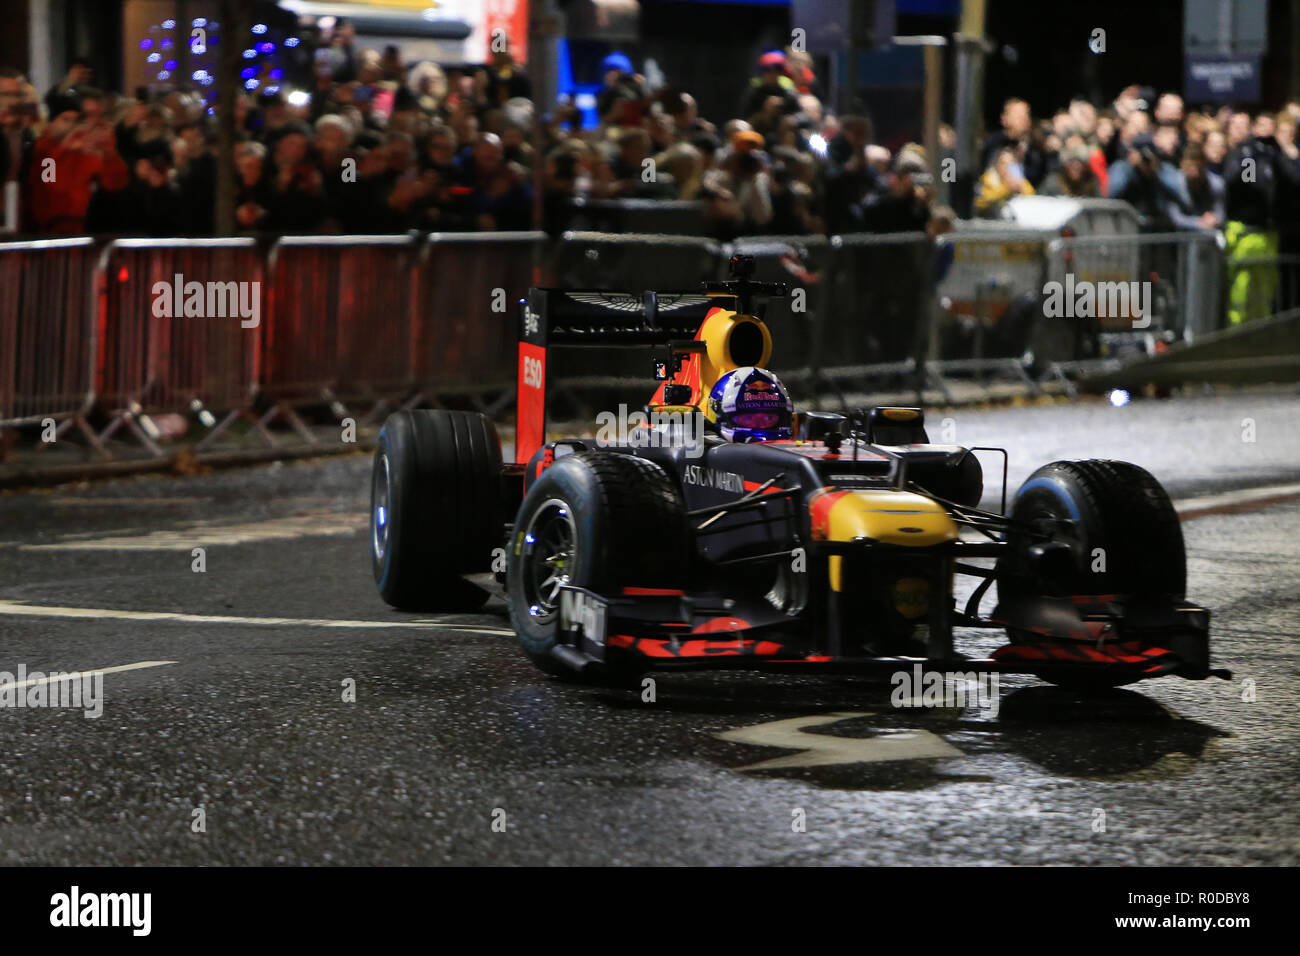 Belfast, Northern Ireland, UK. 3rd November, 2018. Highlights from Redbull F1 Showrun Belfast. Racing legend David Coulthard brought the adrenaline pumping roar of his engine to the streets of Belfast Saturday 3rd of November, 2018. A show like no other, as the Red Bull Racing Formula 1 car performs a full repertoire of donuts, burnouts and speed stretches in front of Belfast's iconic City Hall. This one-of-a-kind show was free to attend gathered thousands. Credit: Irish Eye/Alamy Live News Stock Photo